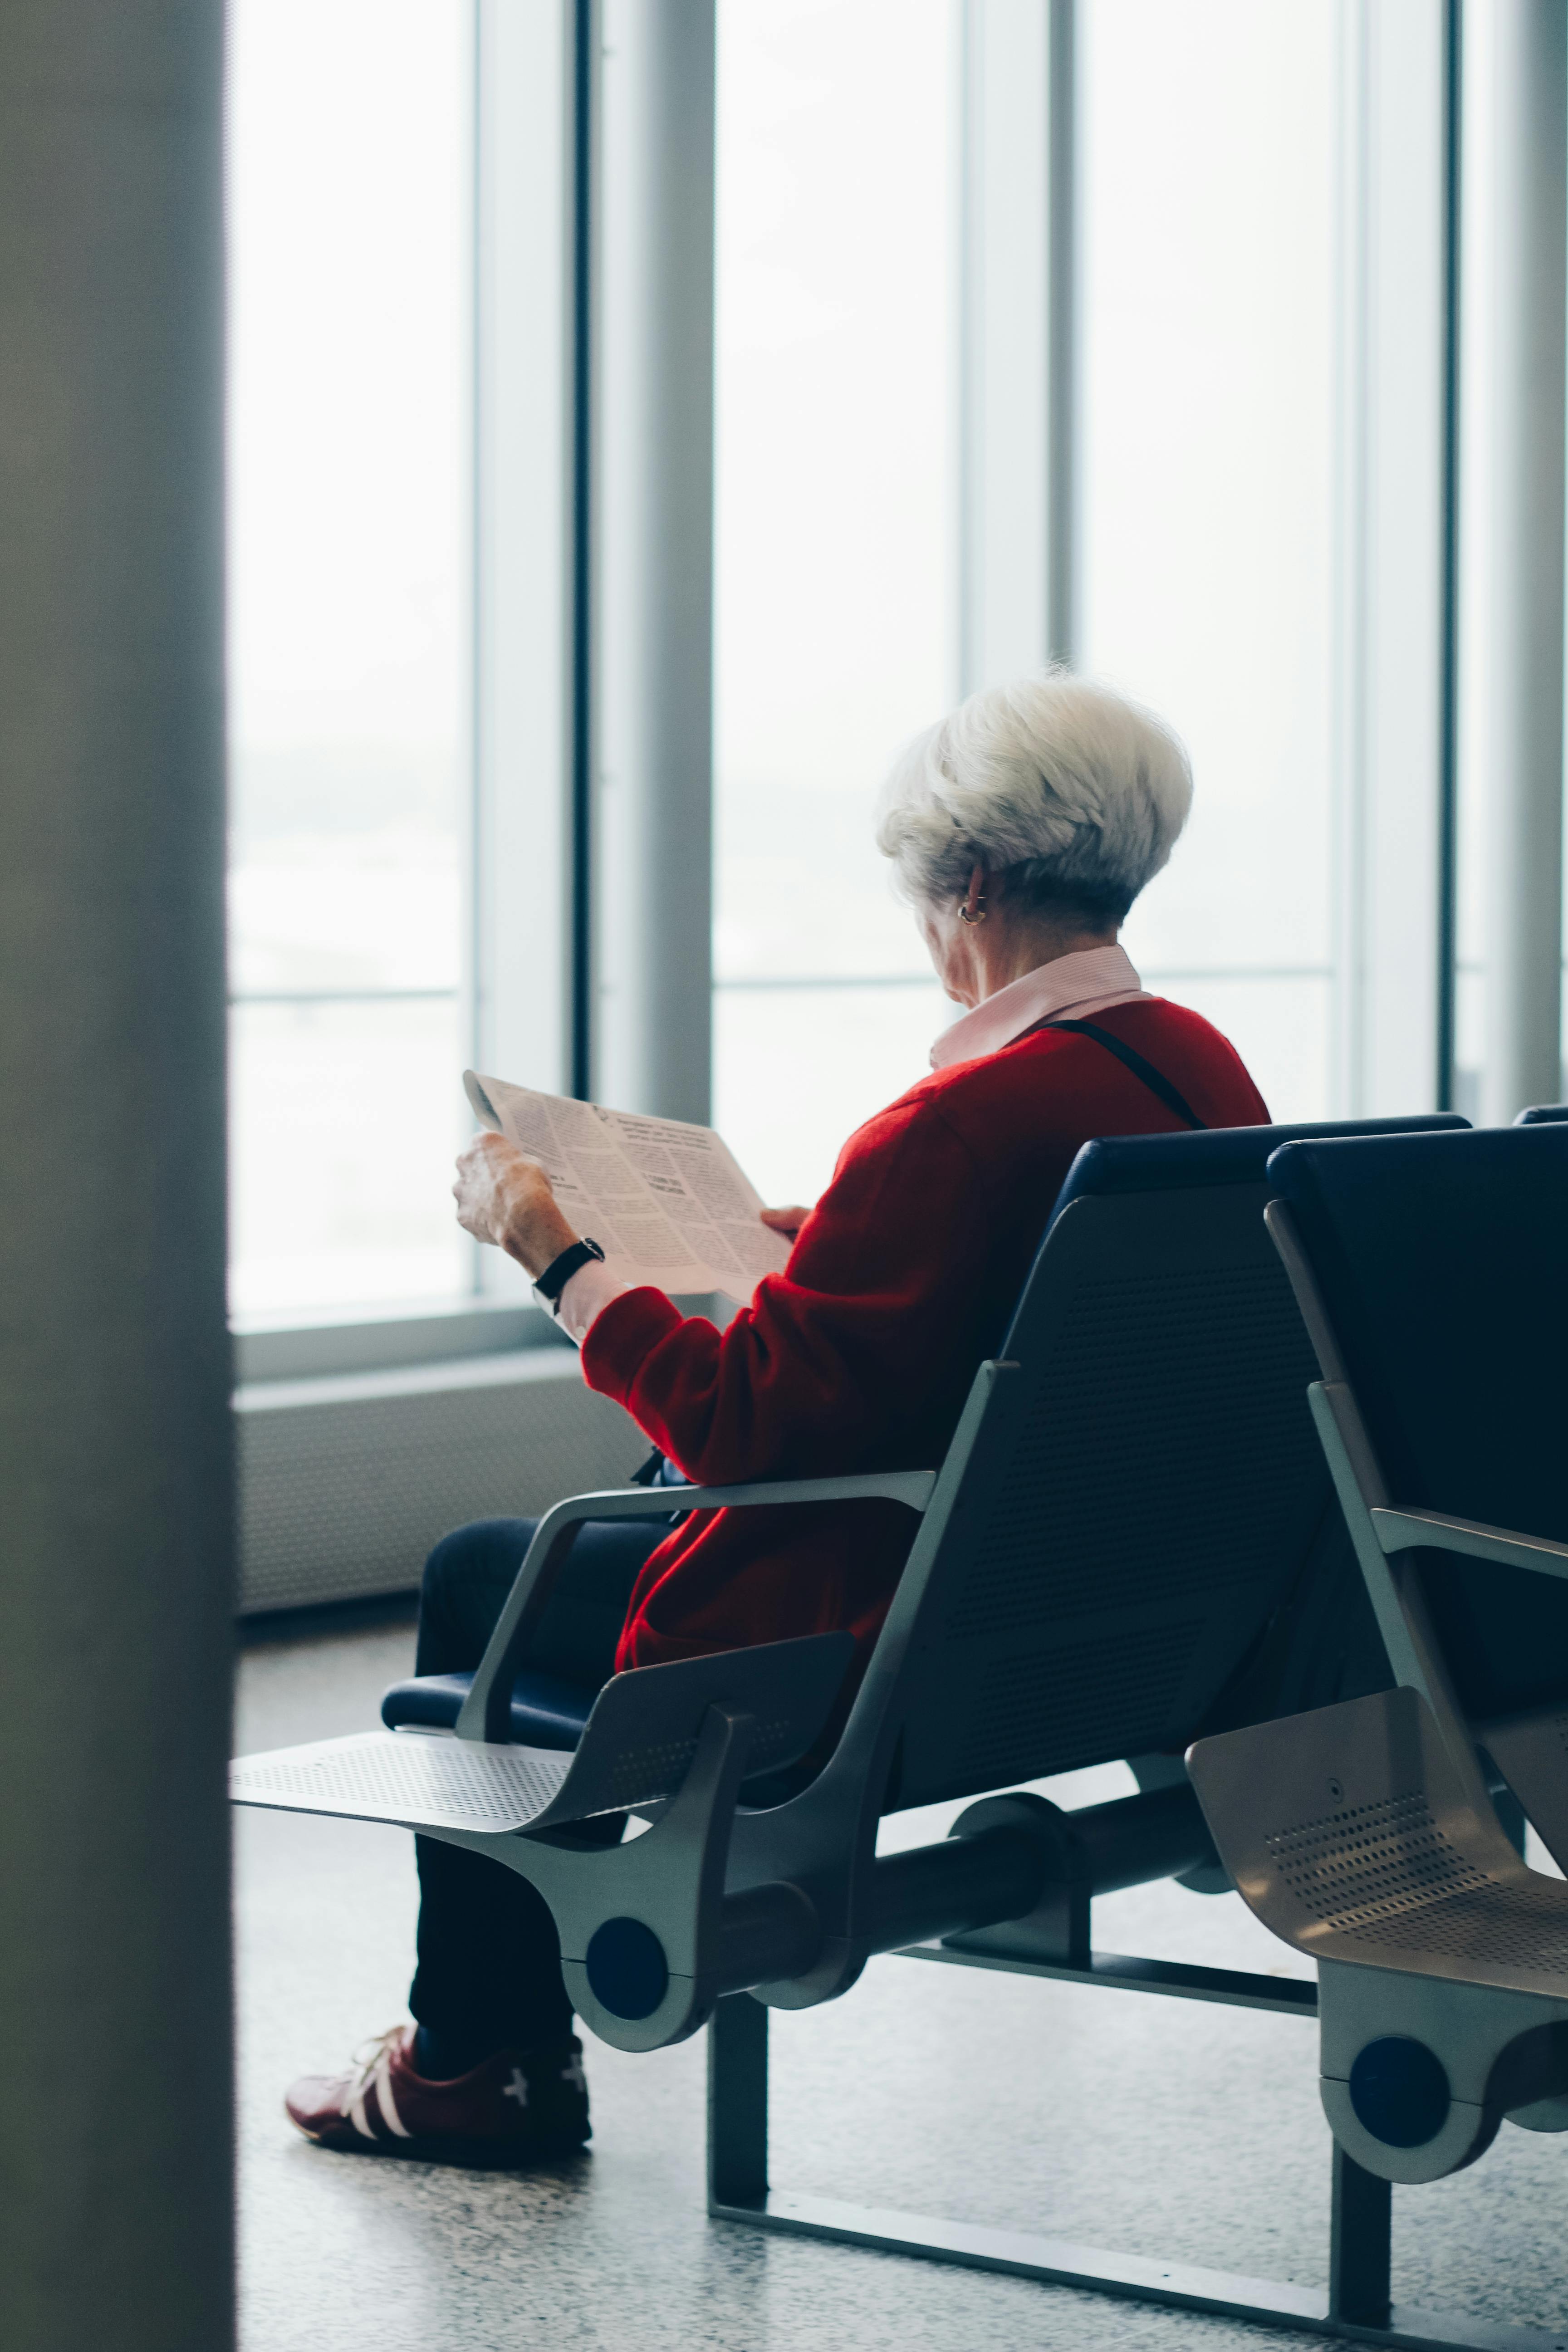 Old woman at an airport | Source: Pexels